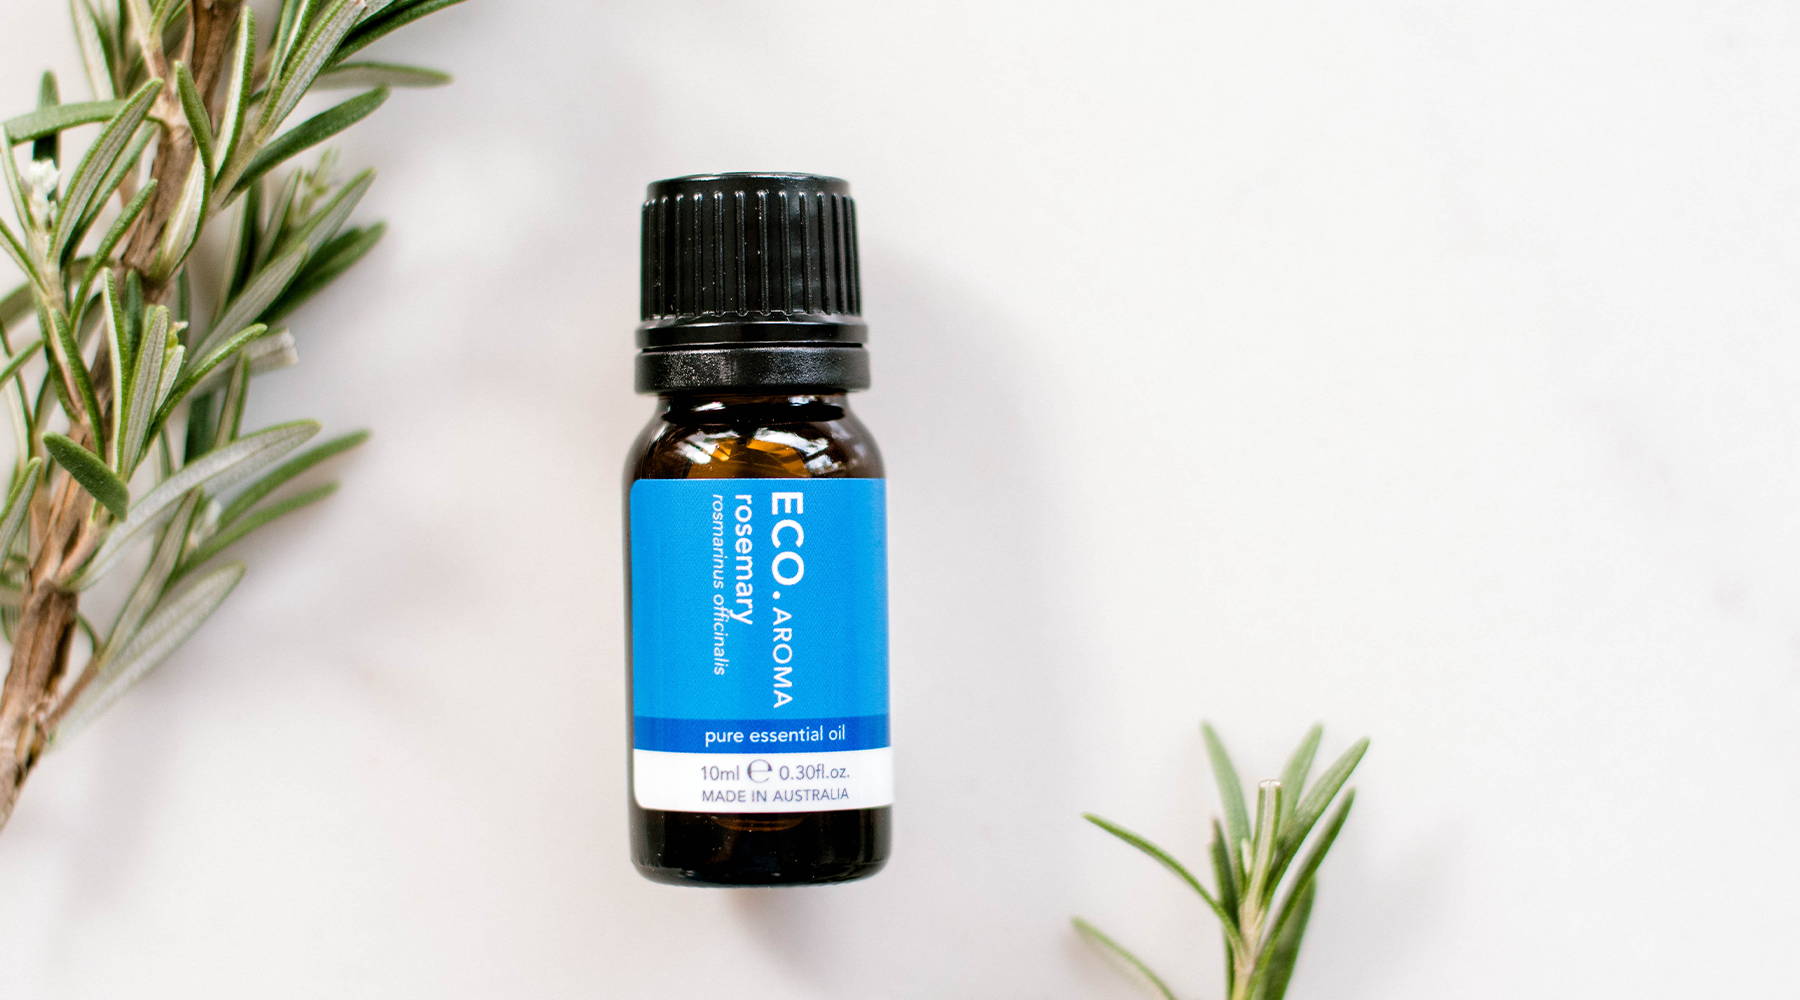 Benefits & uses of Rosemary essential oil – ECO. Modern Essentials